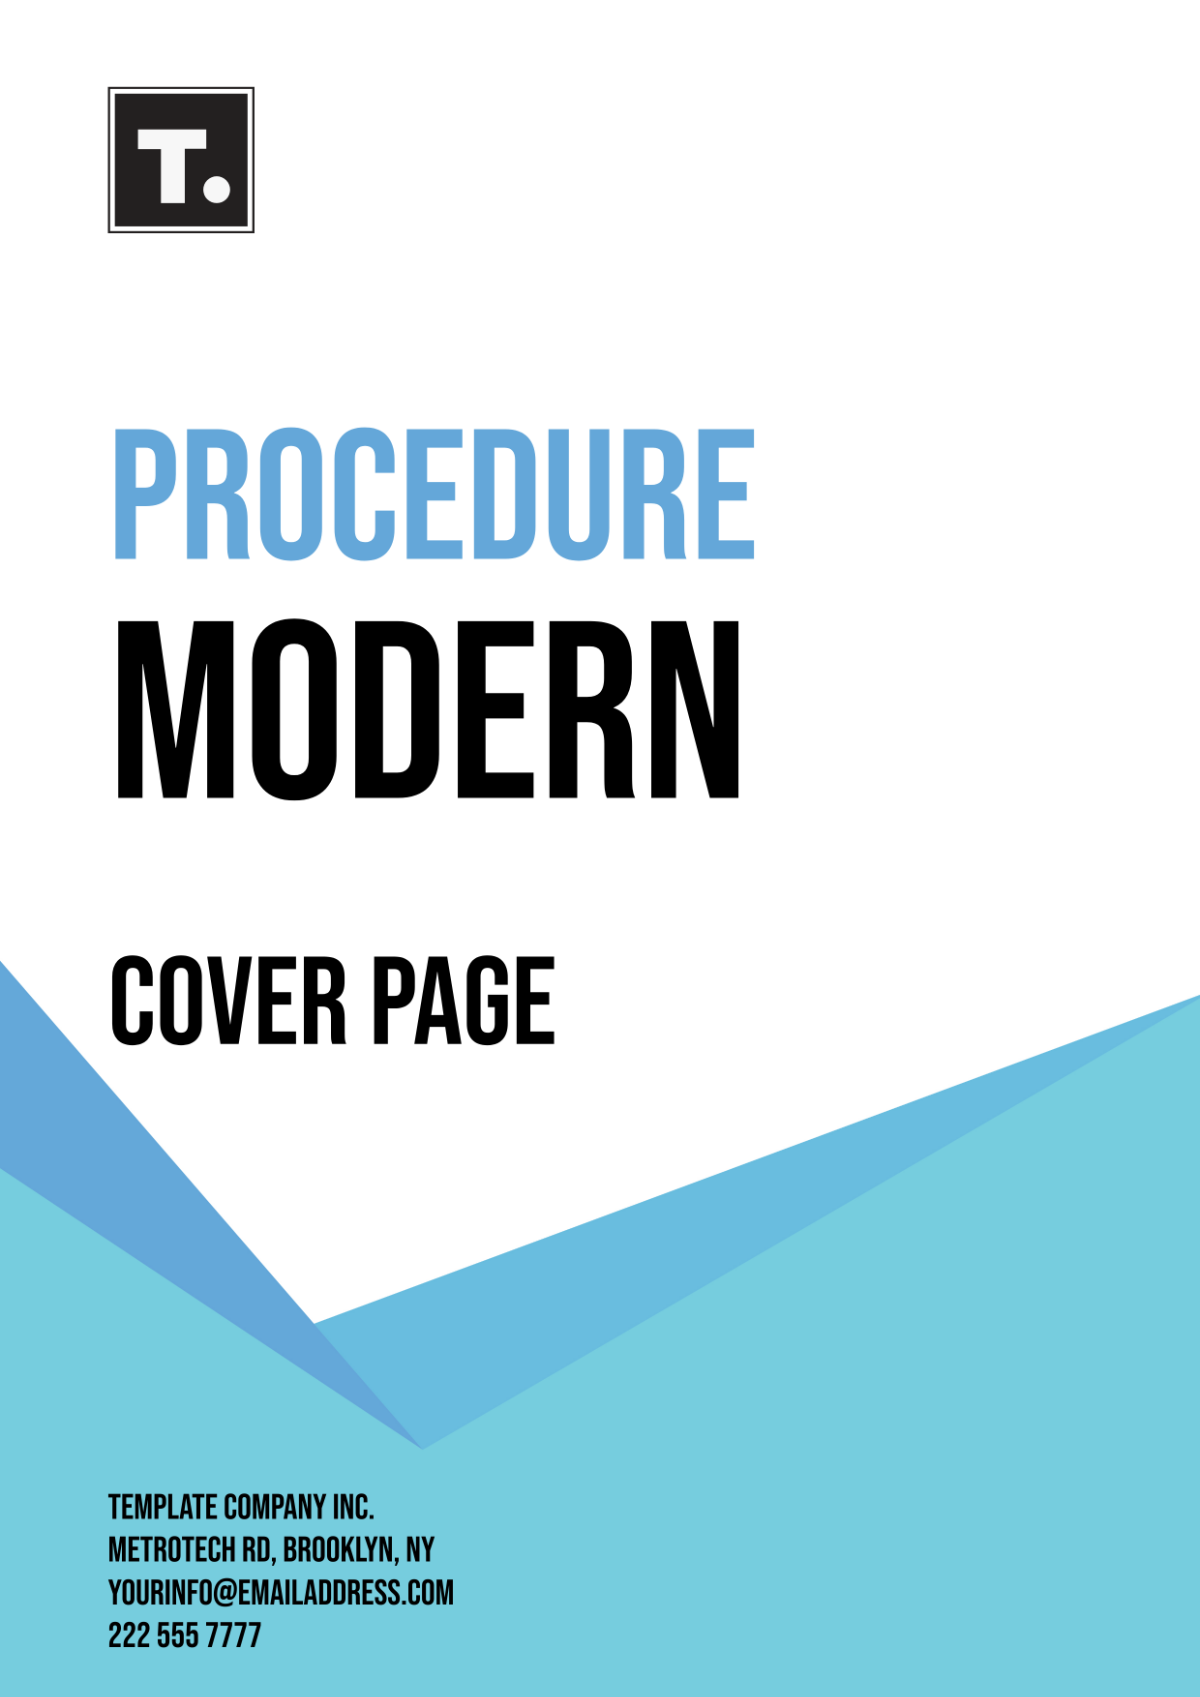 Procedure Modern Cover Page